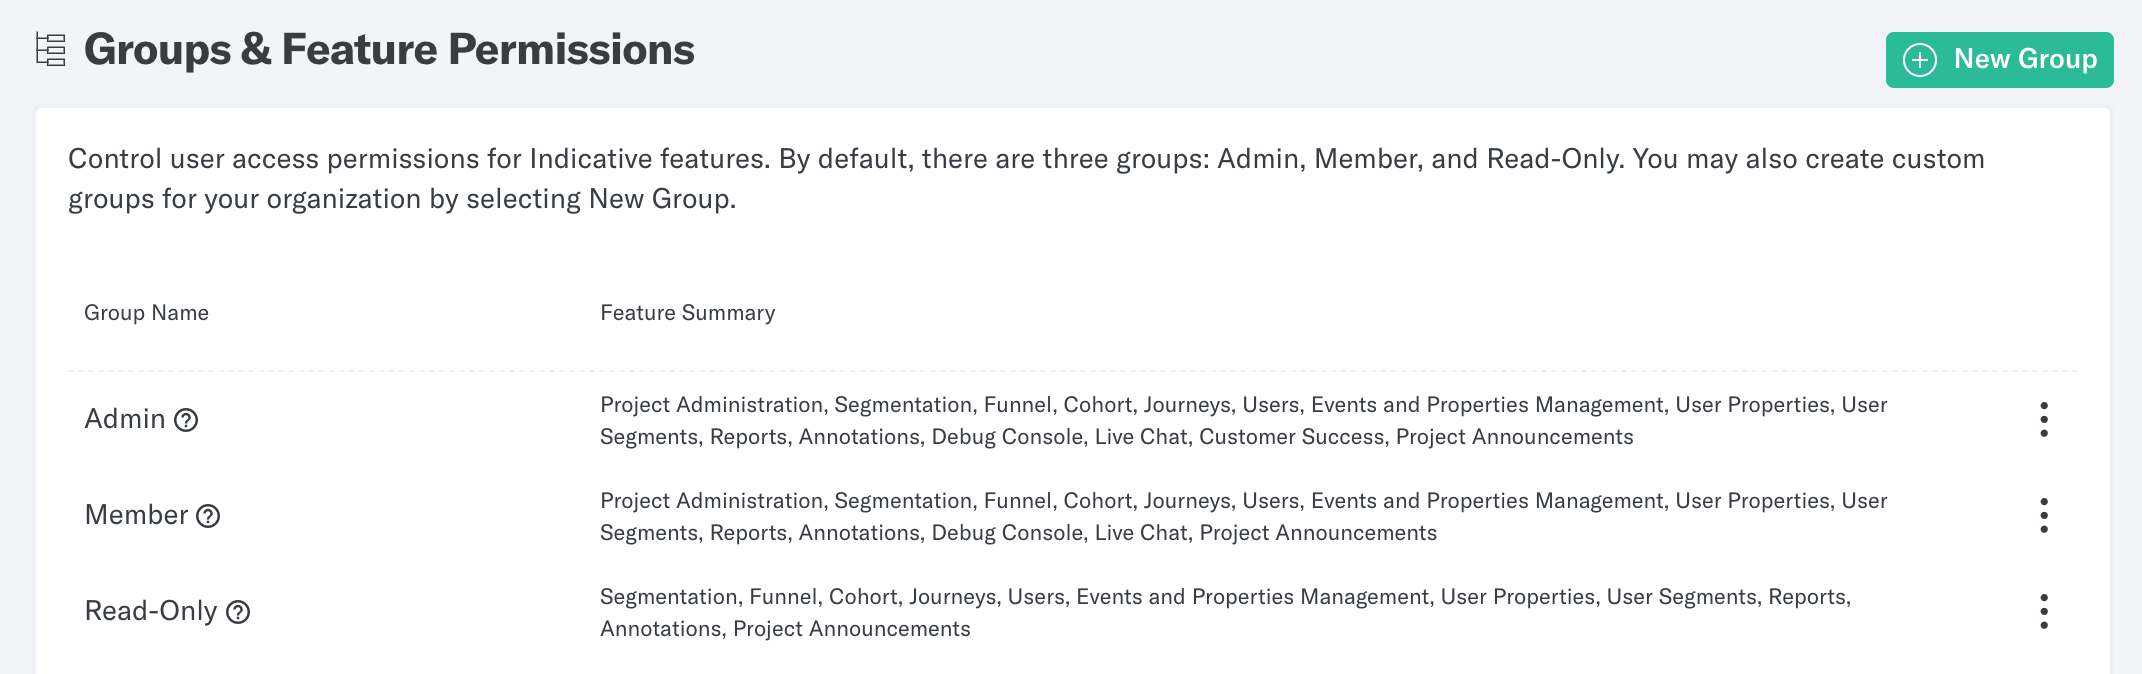 Group Feature Permissions